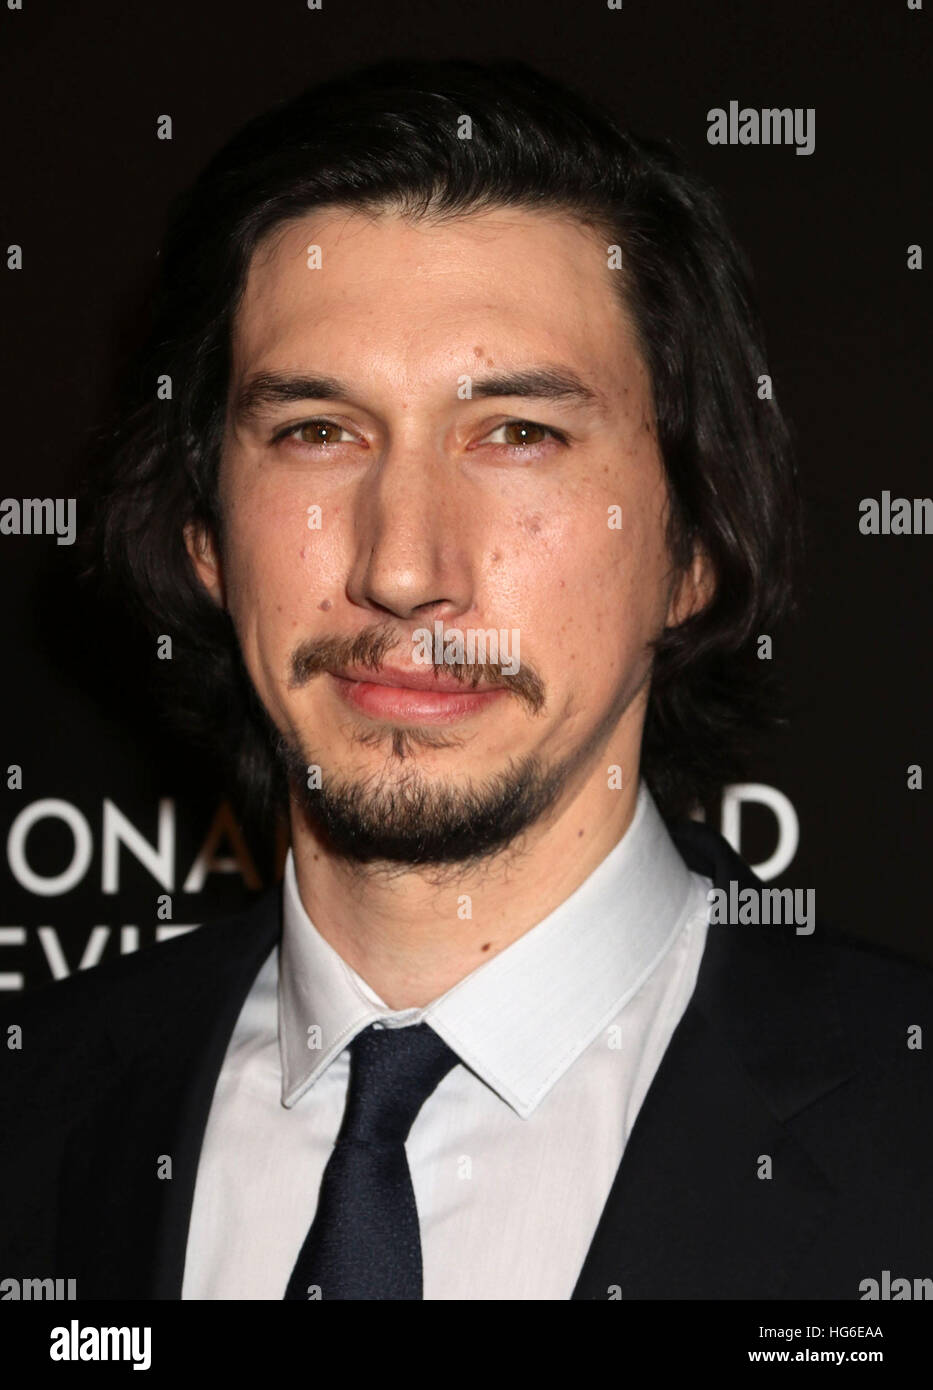 New York, New York, USA. 4th Jan, 2017. Actor ADAM DRIVER attends the 2016 National Board of Review Gala held at Cipriani 42nd Street. © Nancy Kaszerman/ZUMA Wire/Alamy Live News Stock Photo